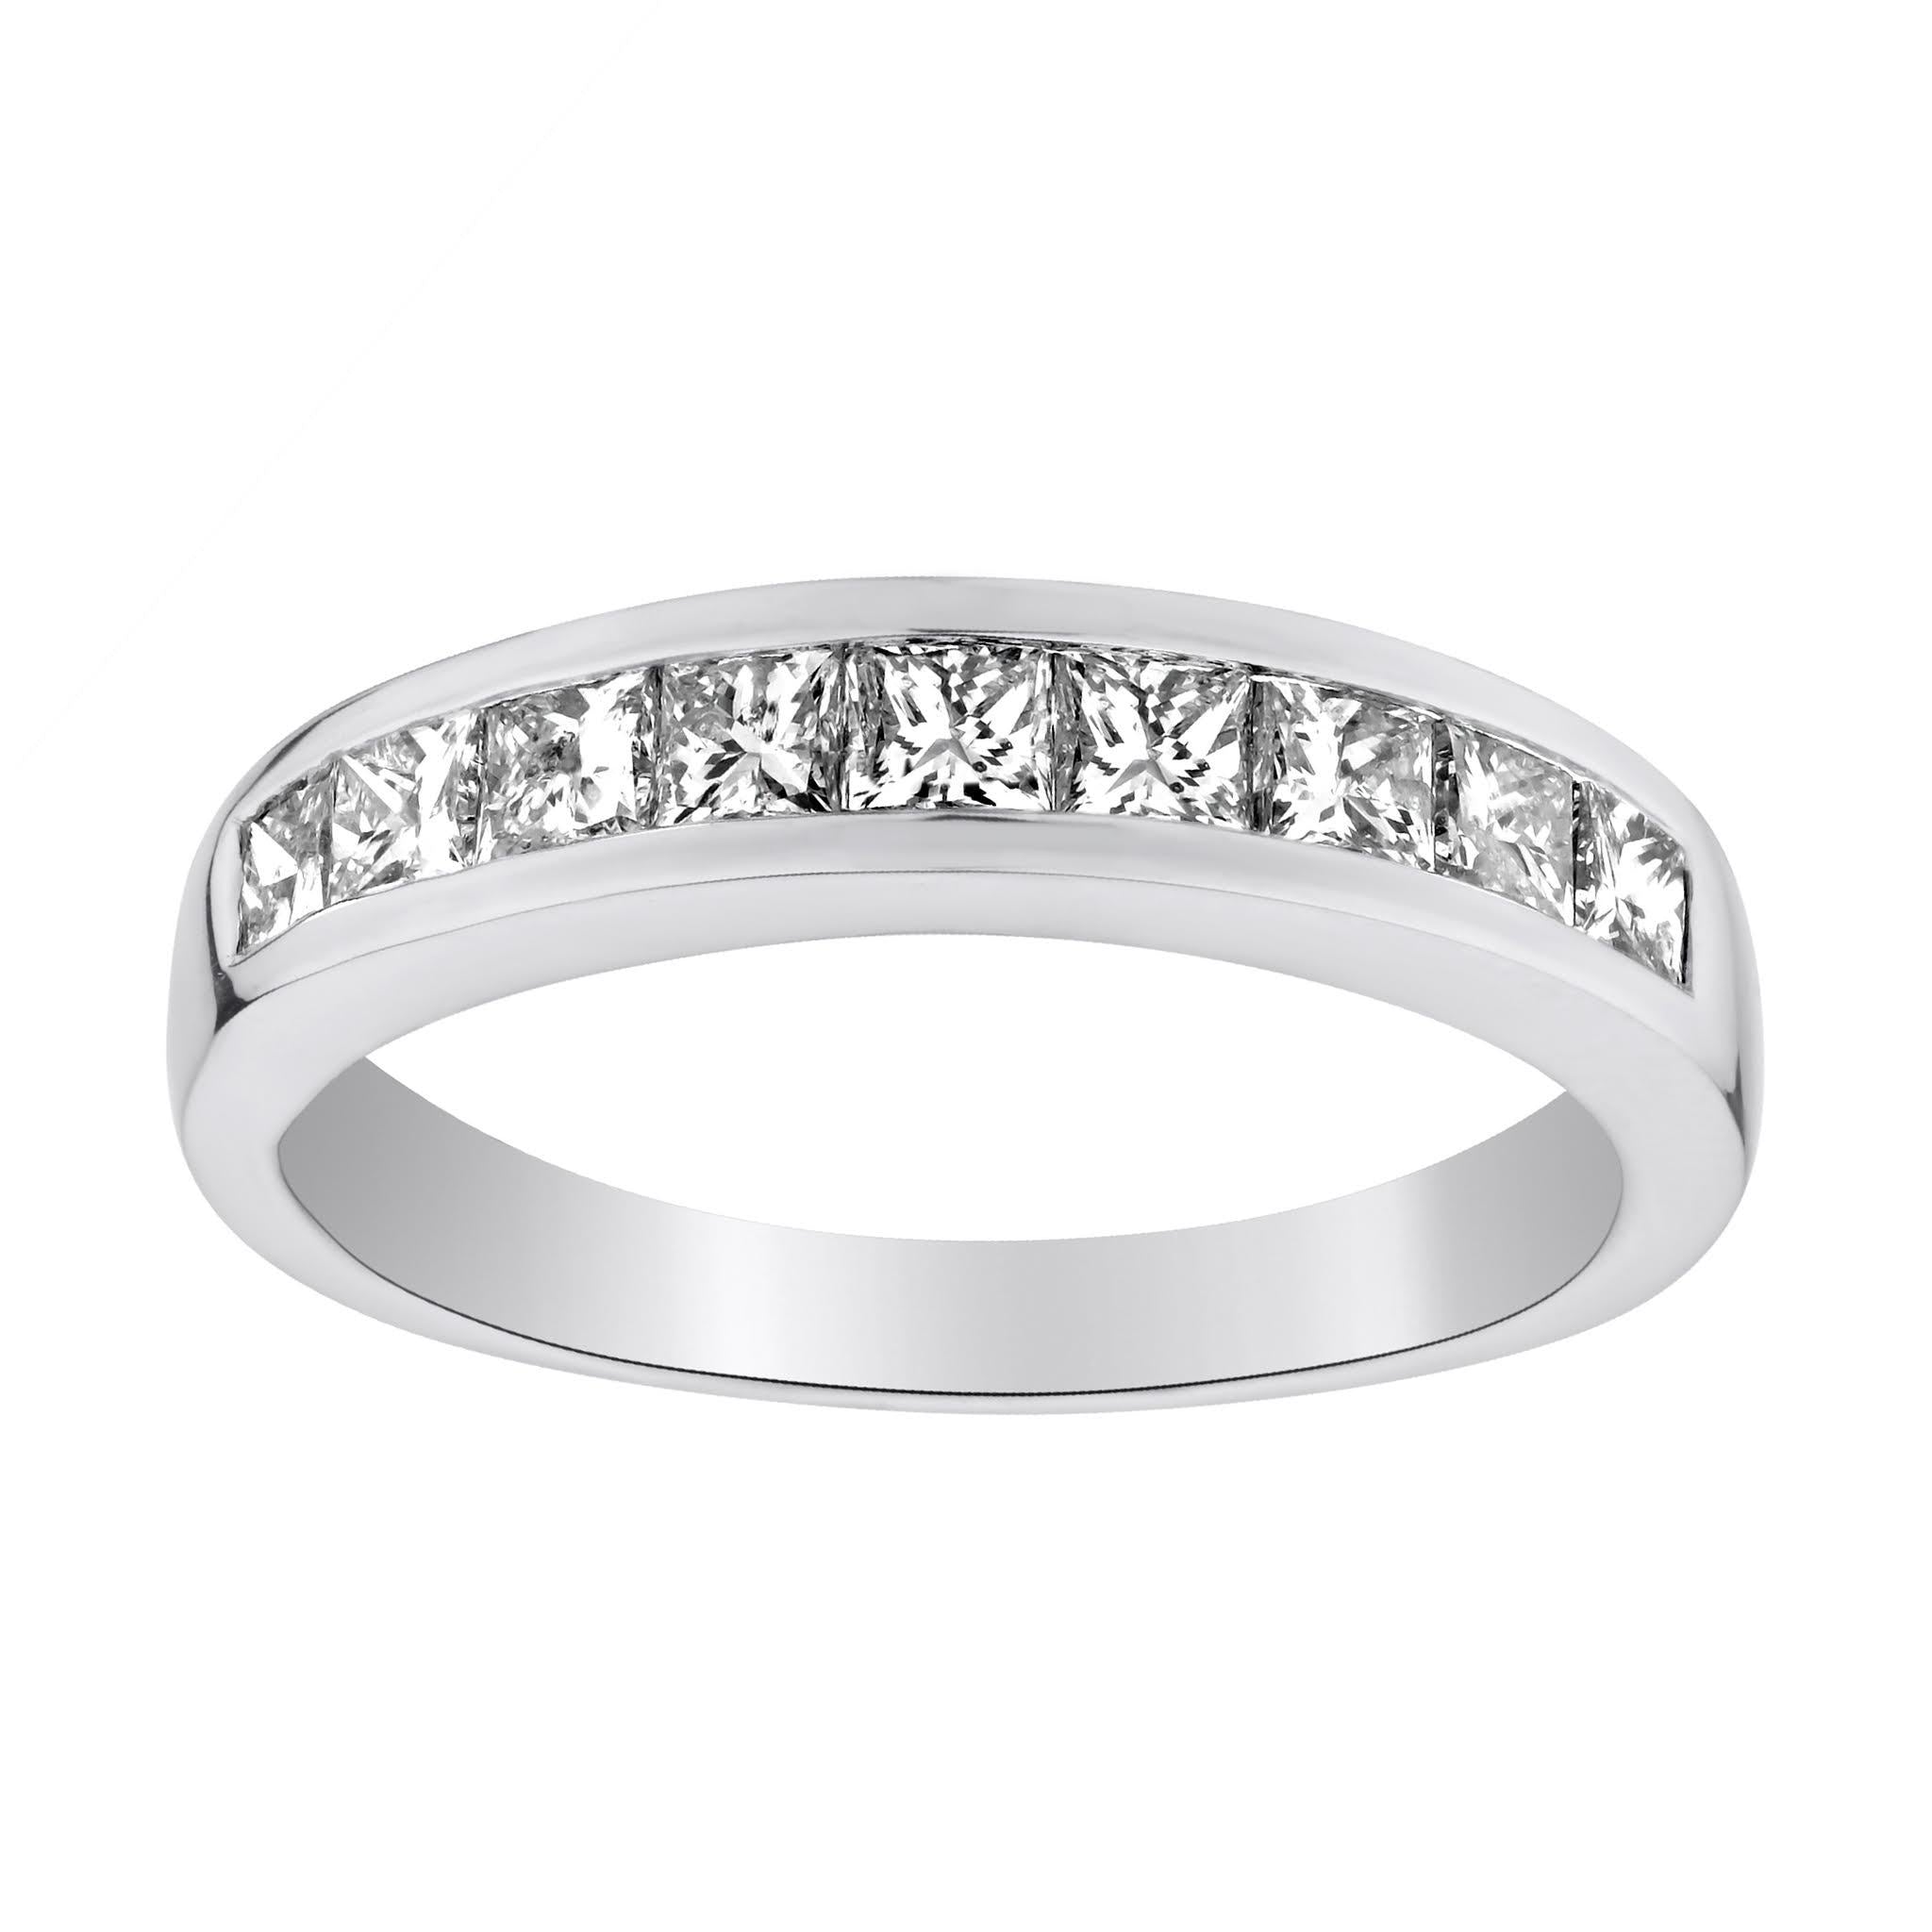 1.00 CARAT DIAMOND PRINCESS RING BAND, 14kt WHITE GOLD.......................NOW - Griffin Jewellery Designs